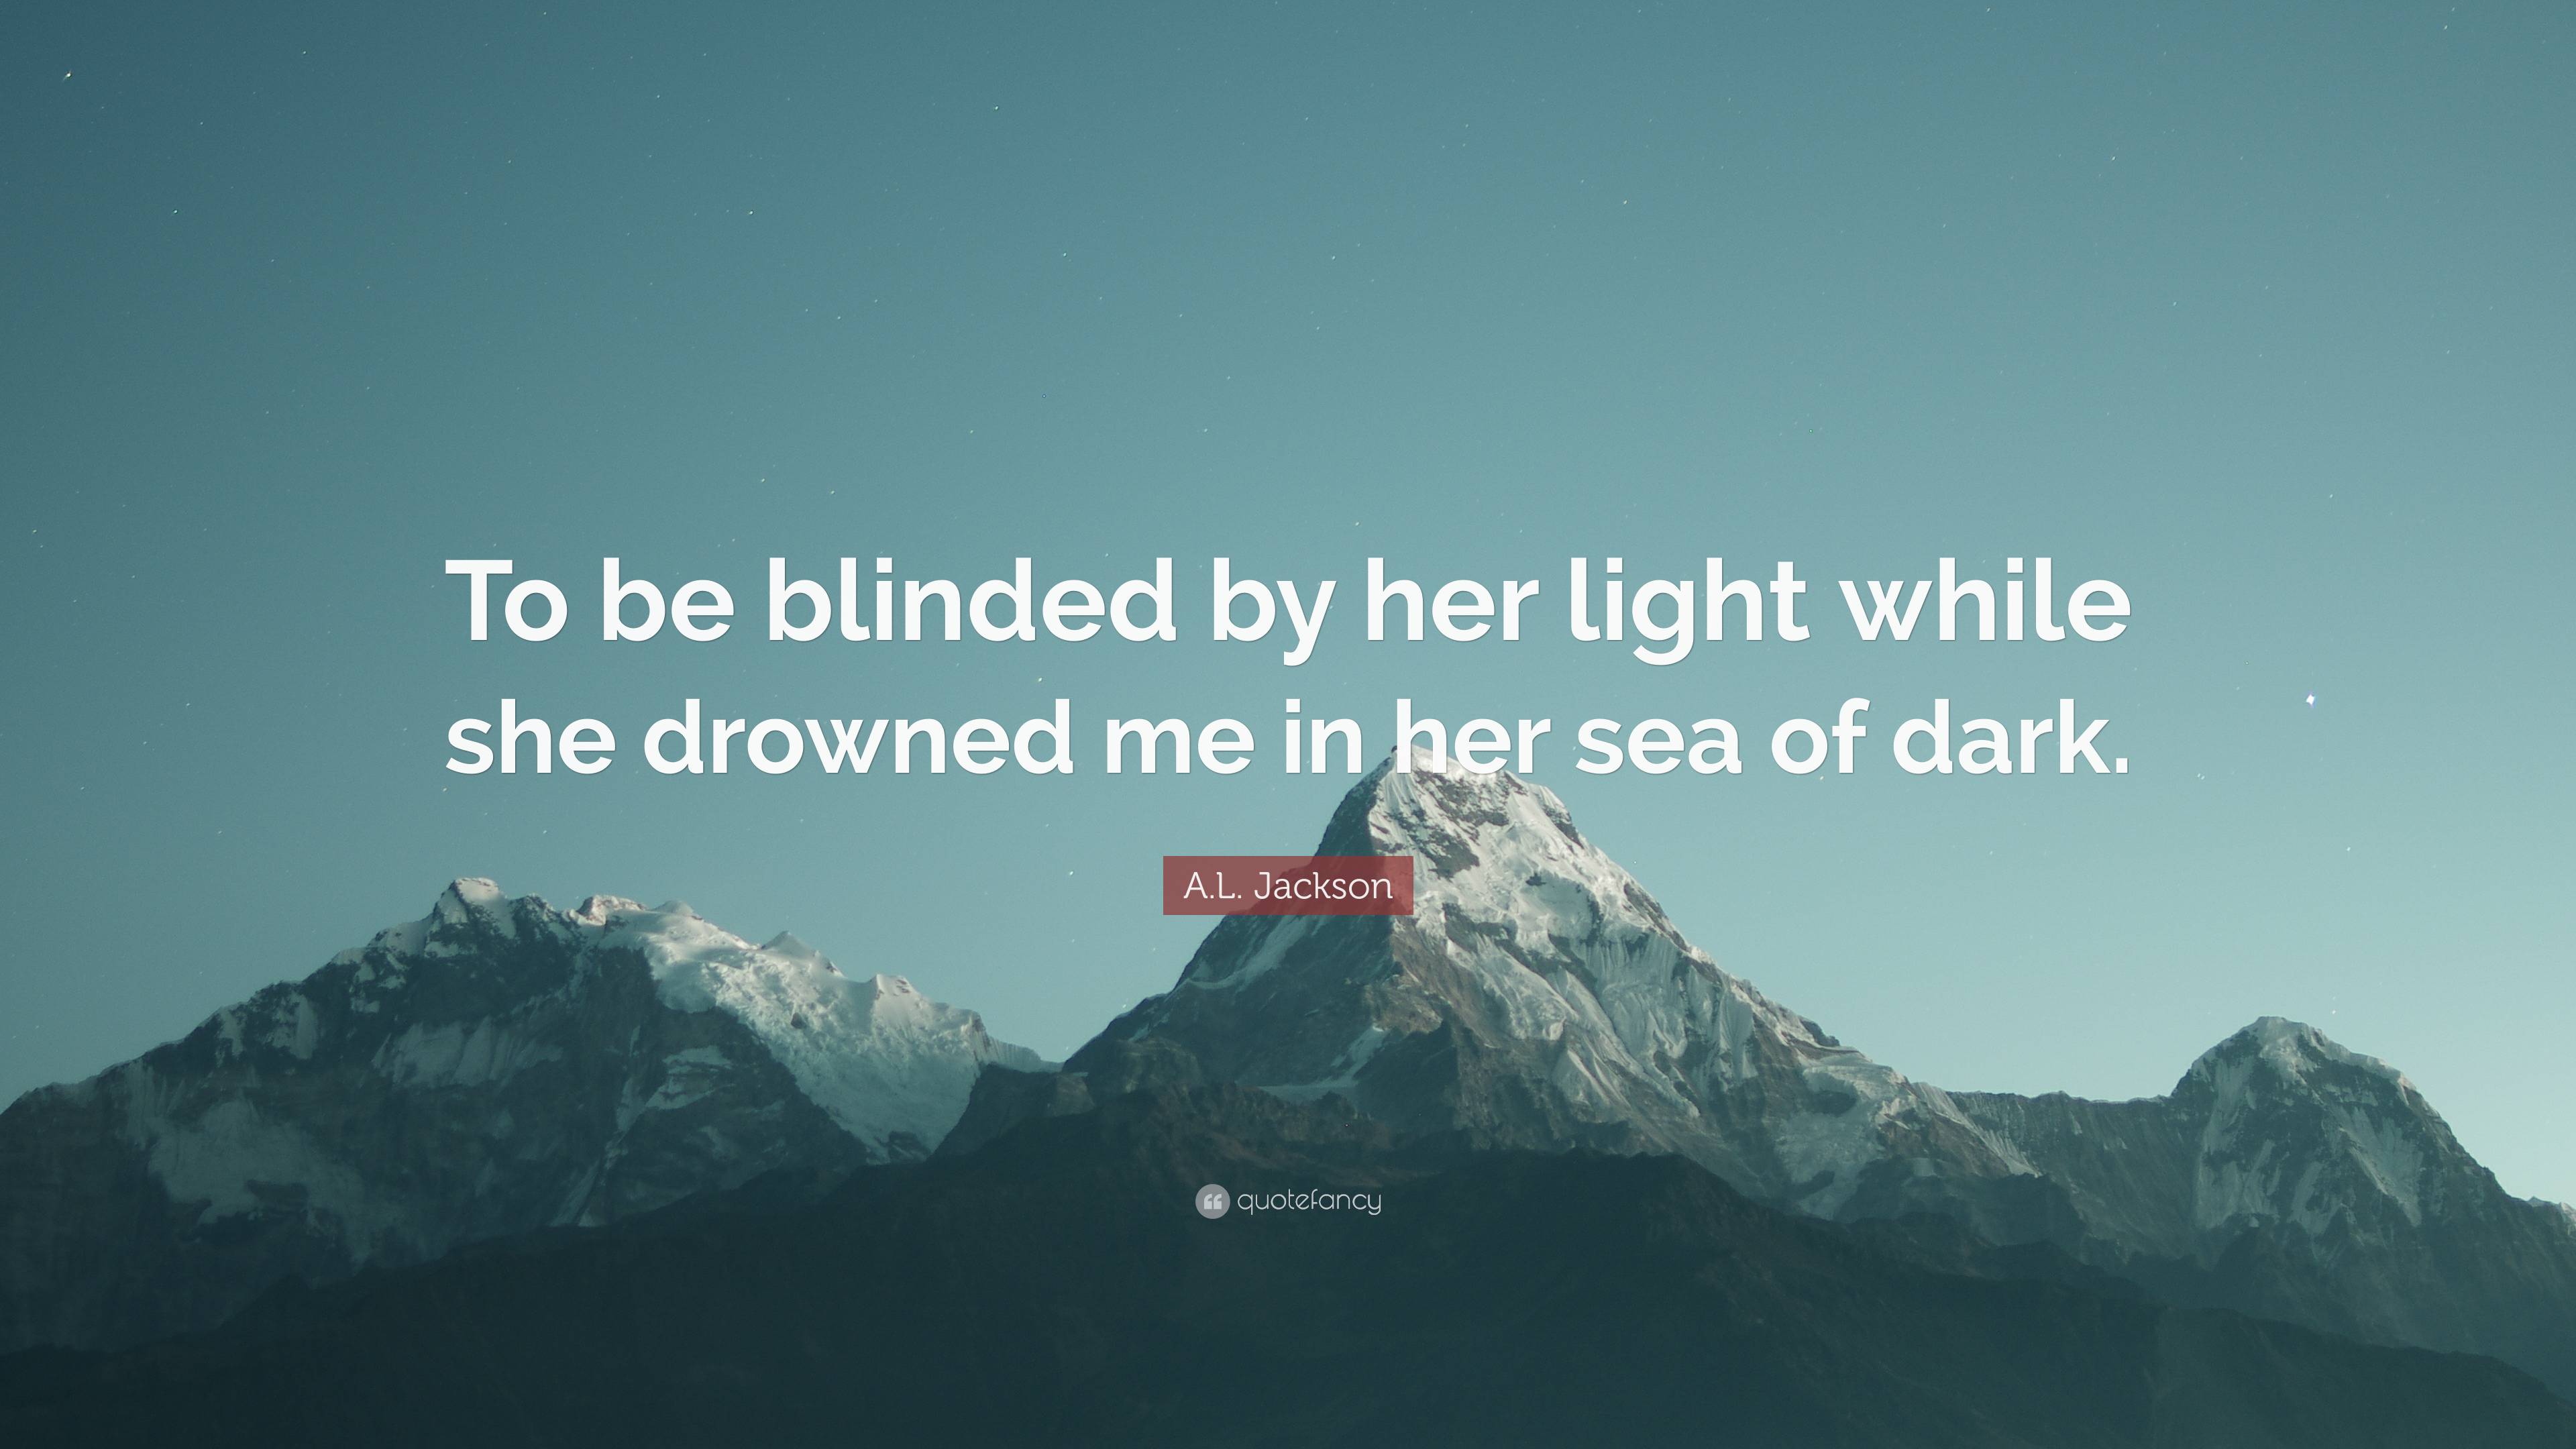 A.L. Jackson Quote: “To blinded by her light while she drowned me in her sea